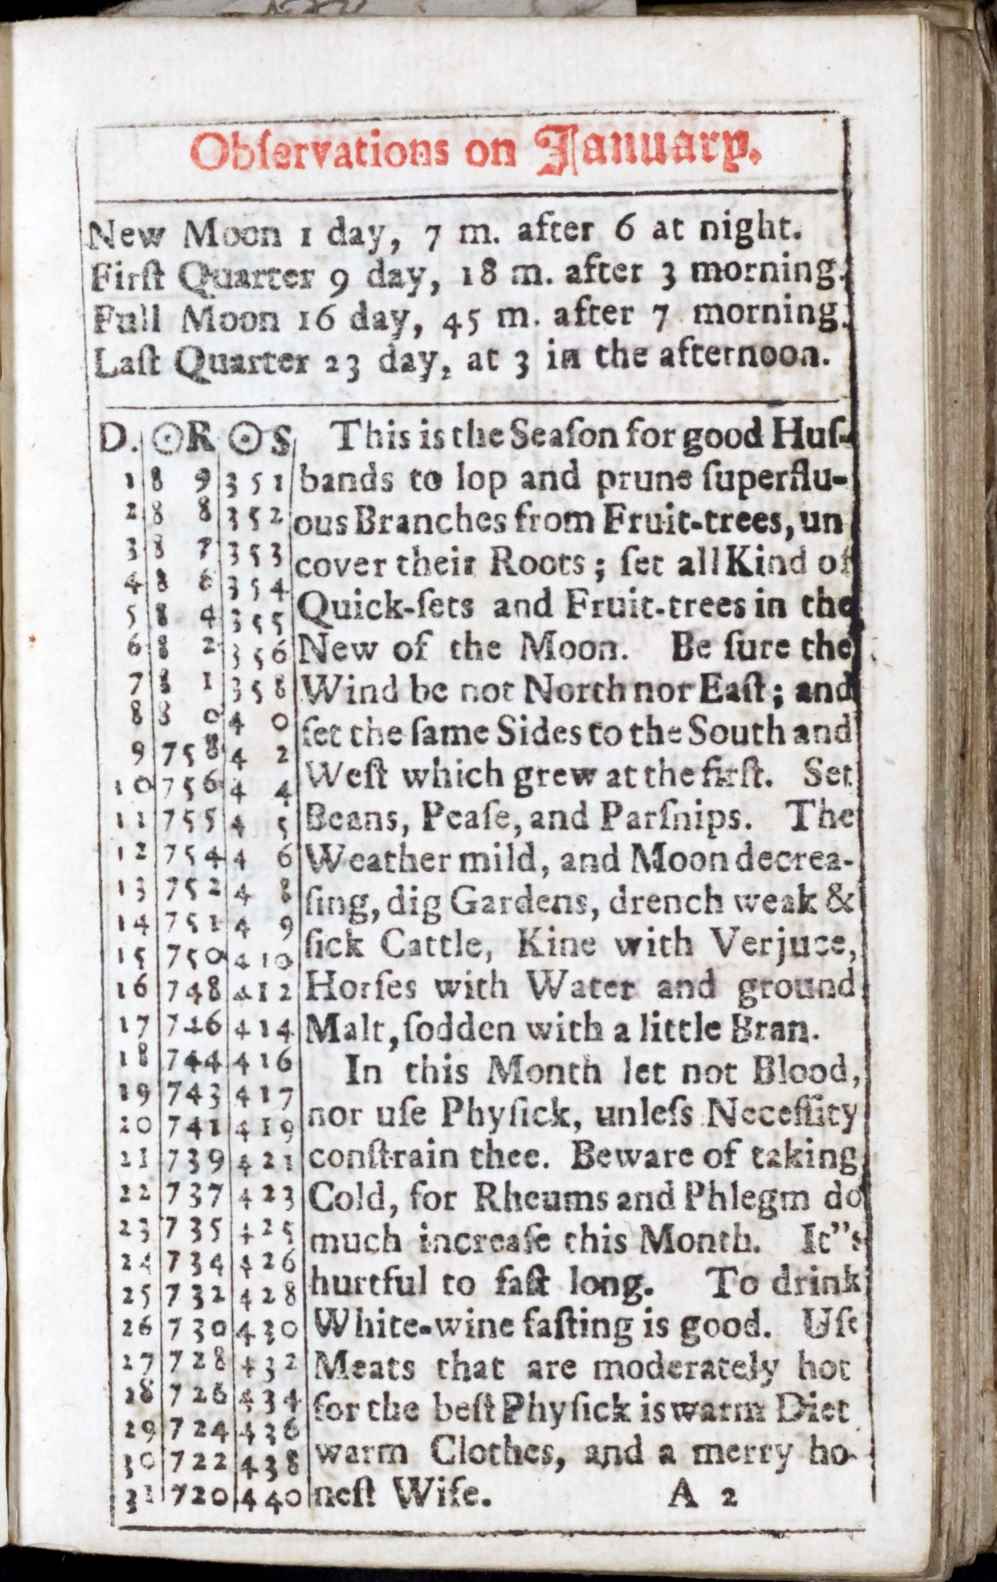 A page from an almanac from 1717 containing a wealth of information, including not only a calendar, but also observations on the weather as well as astronomical and astrological facts.